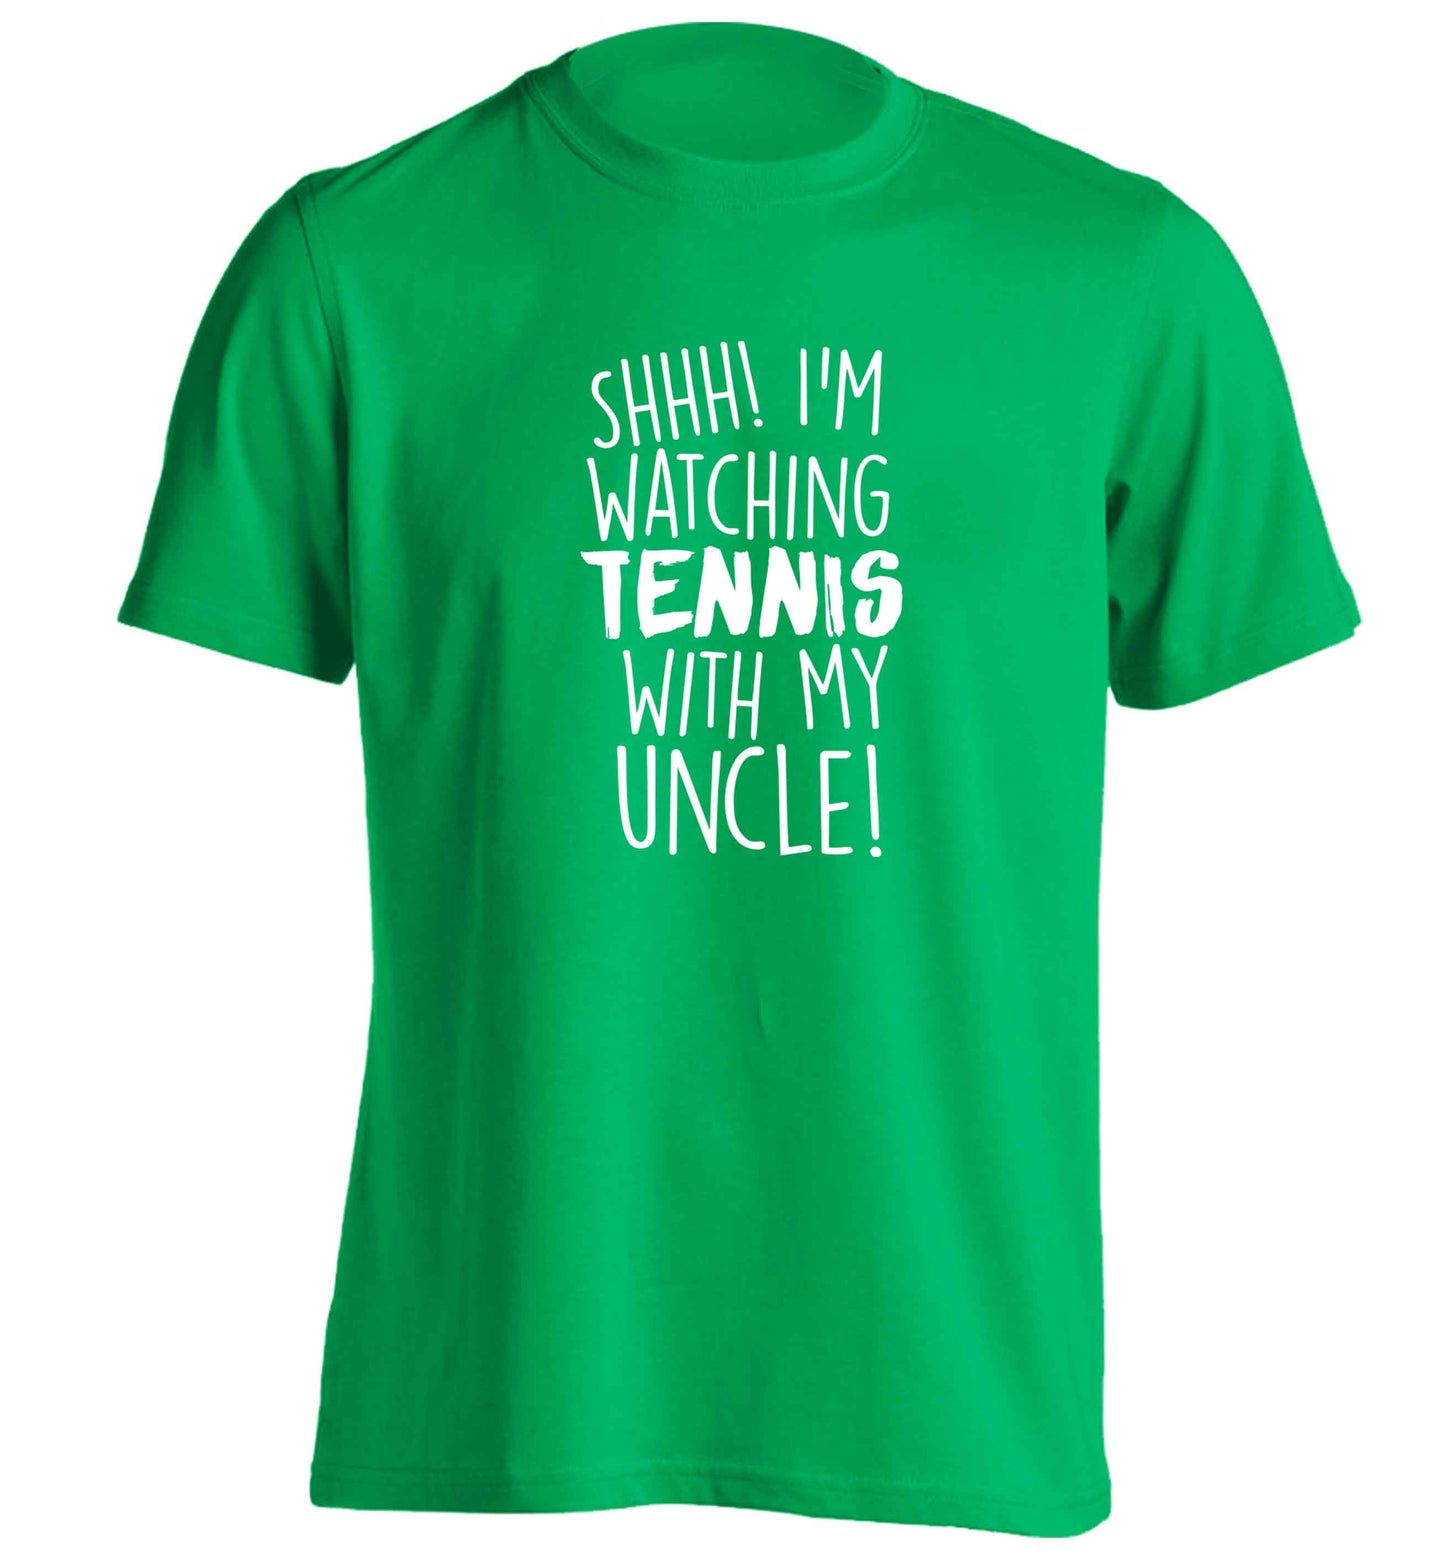 Shh! I'm watching tennis with my uncle! adults unisex green Tshirt 2XL